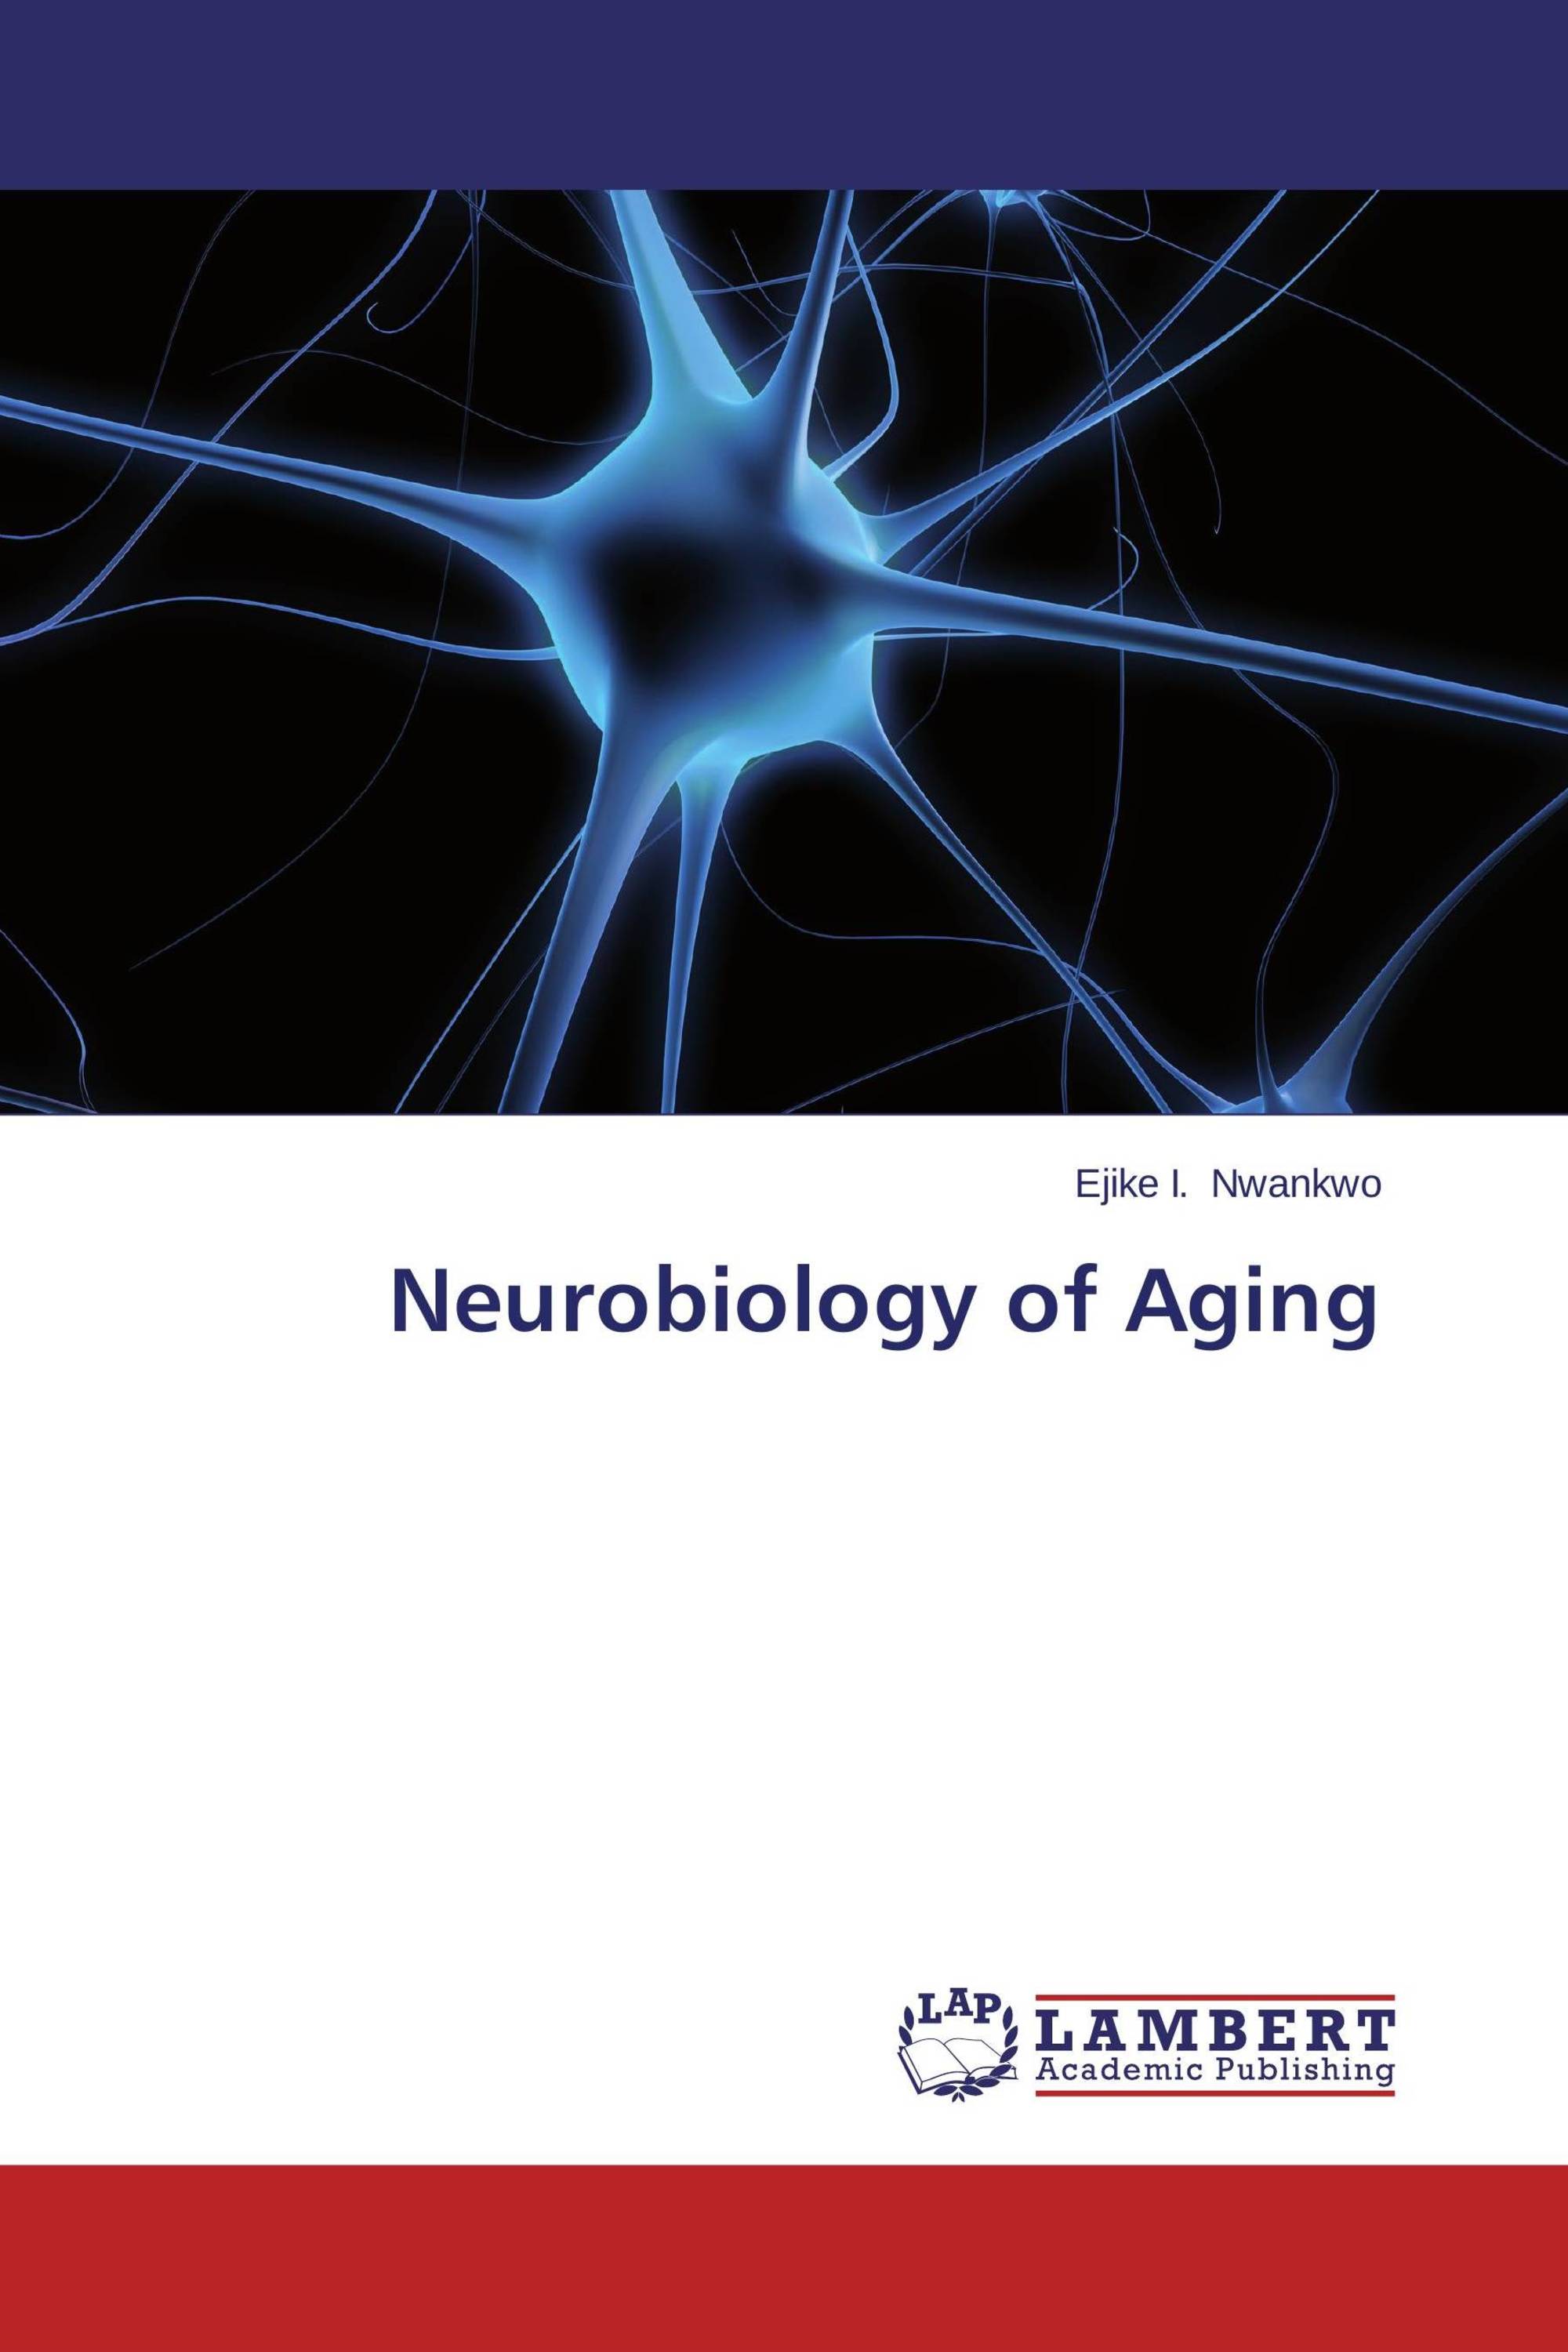 Neurobiology Of Aging 978 3 659 51763 1 9783659517631 3659517631 7880